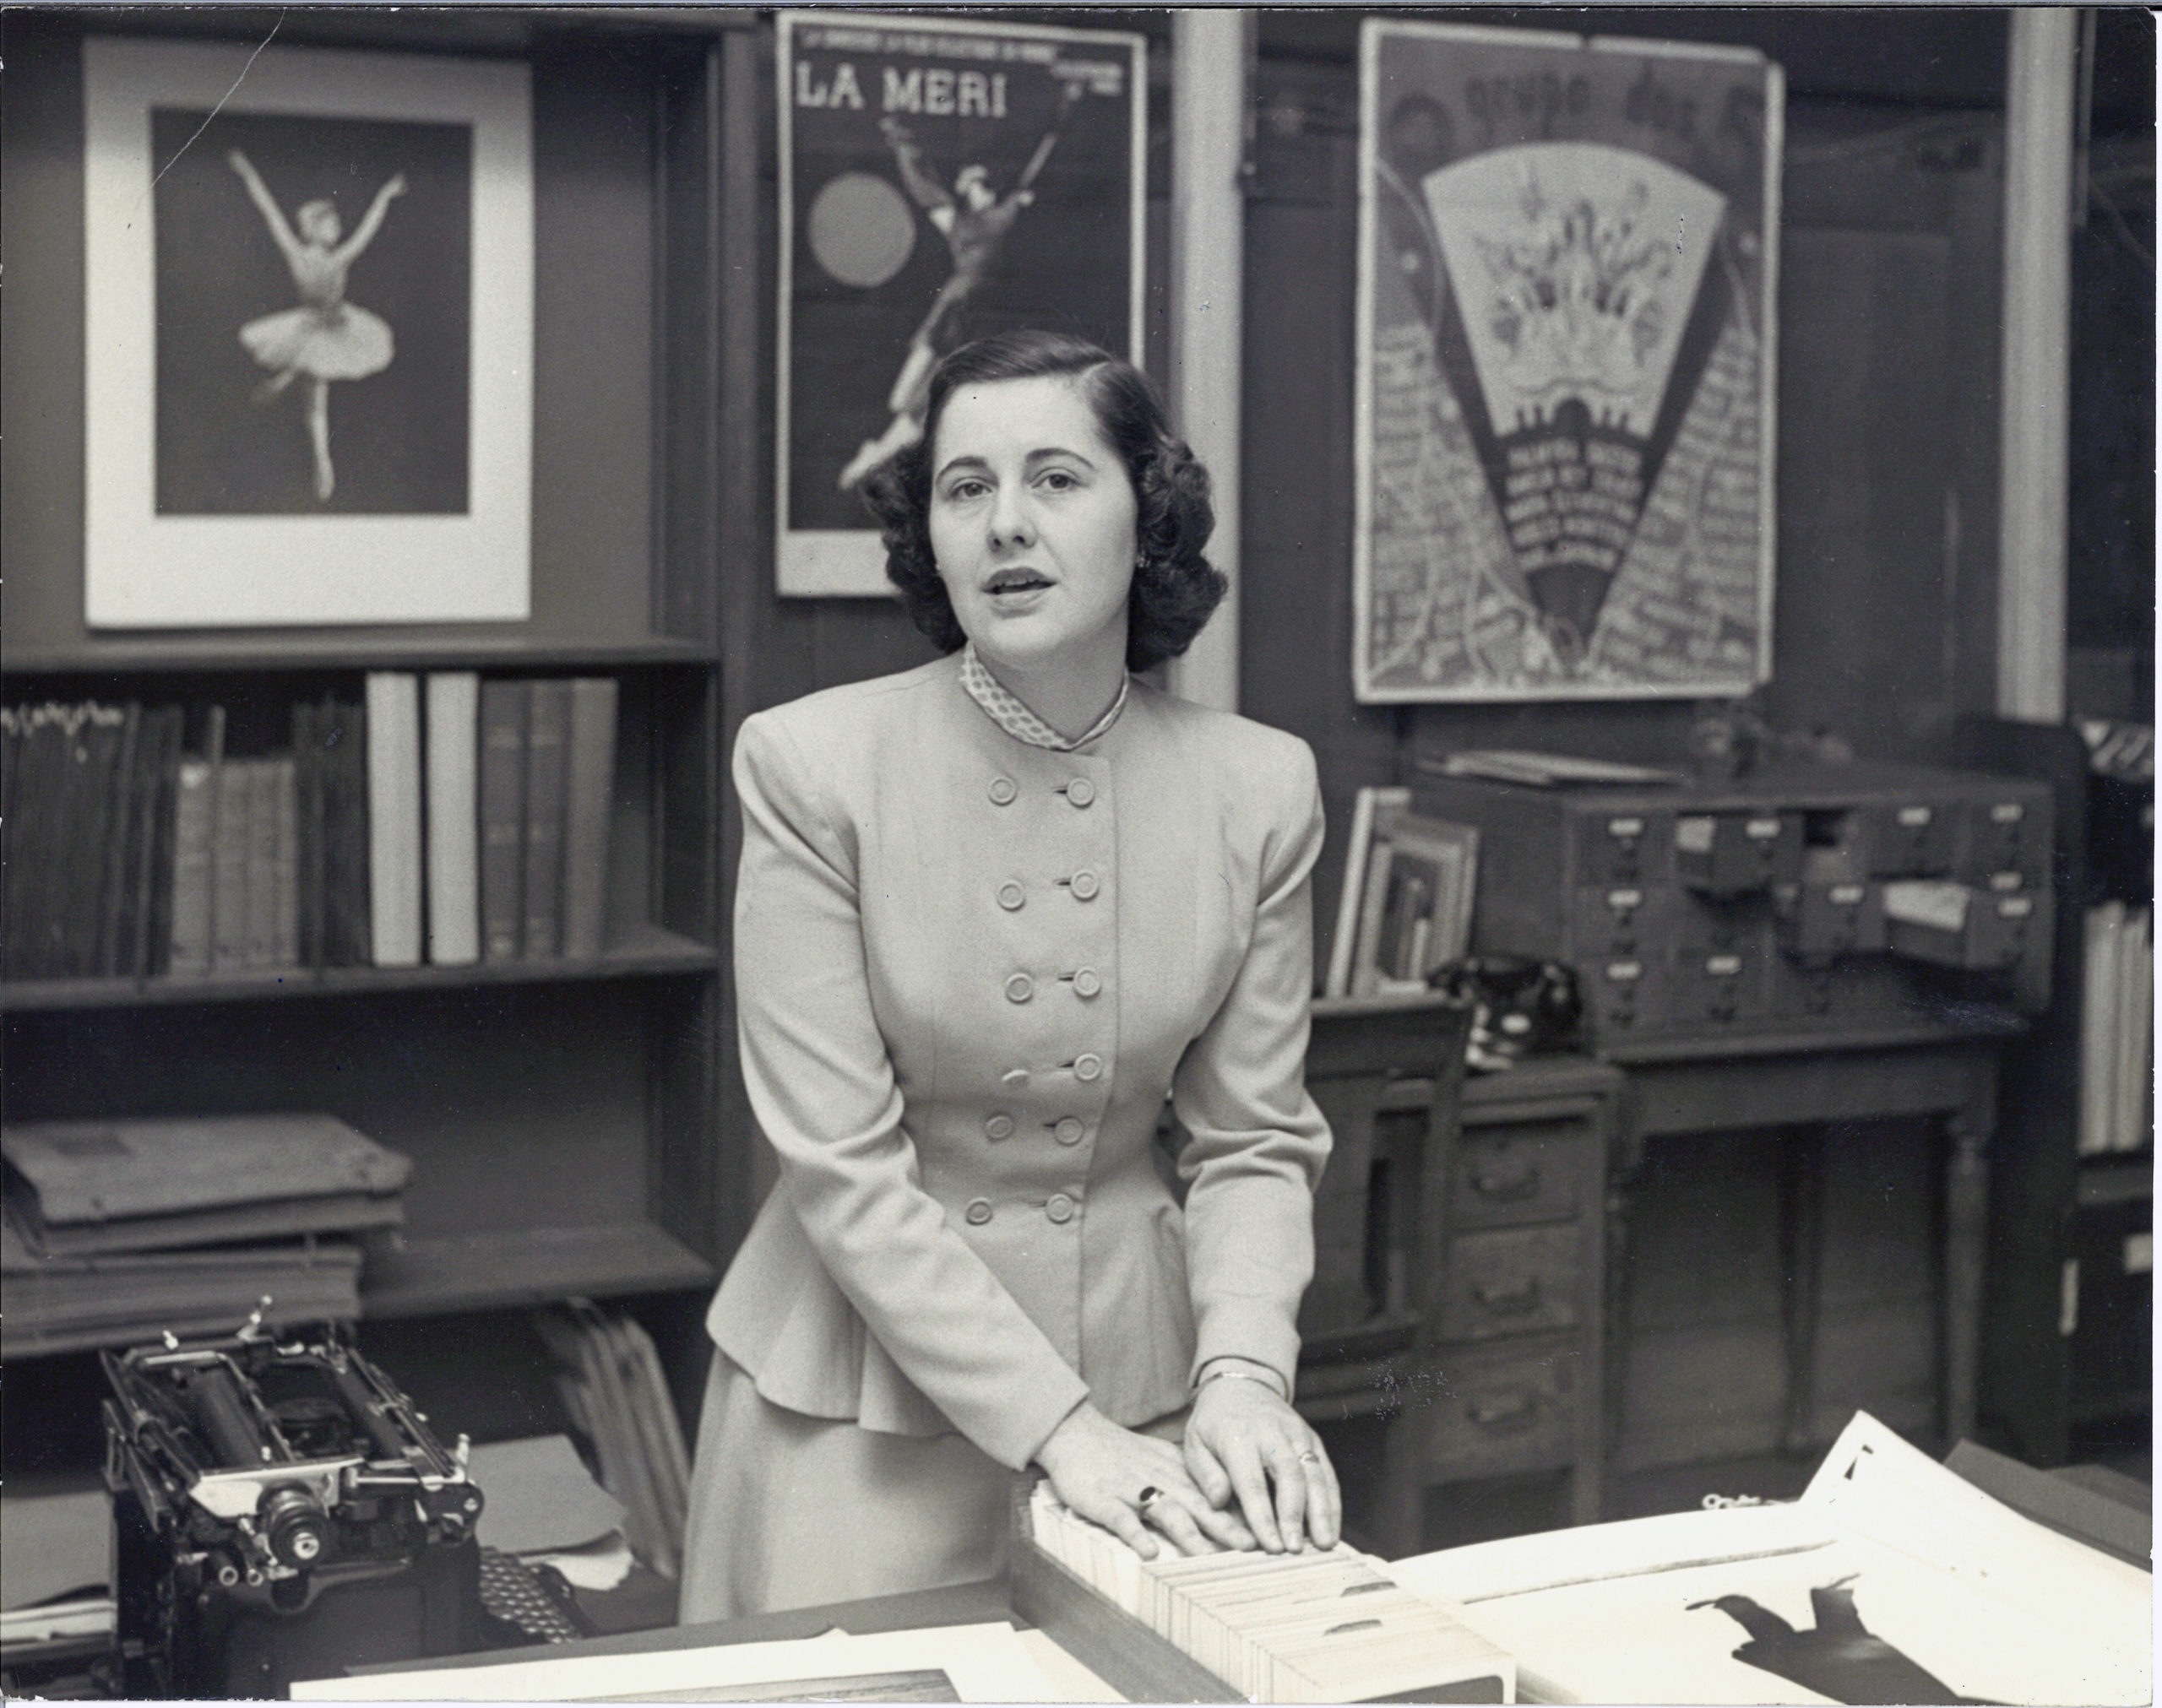 Genevieve Oswald glances toward the camera, mid-speech. Her hands rest on a card catalogue on a full desk; a typewriter is visible to her right. Behind her are shelves with books, and framed posters and portraits of a ballerina, La Meri, and the like. She wears a double breasted, long-sleeved blouse.